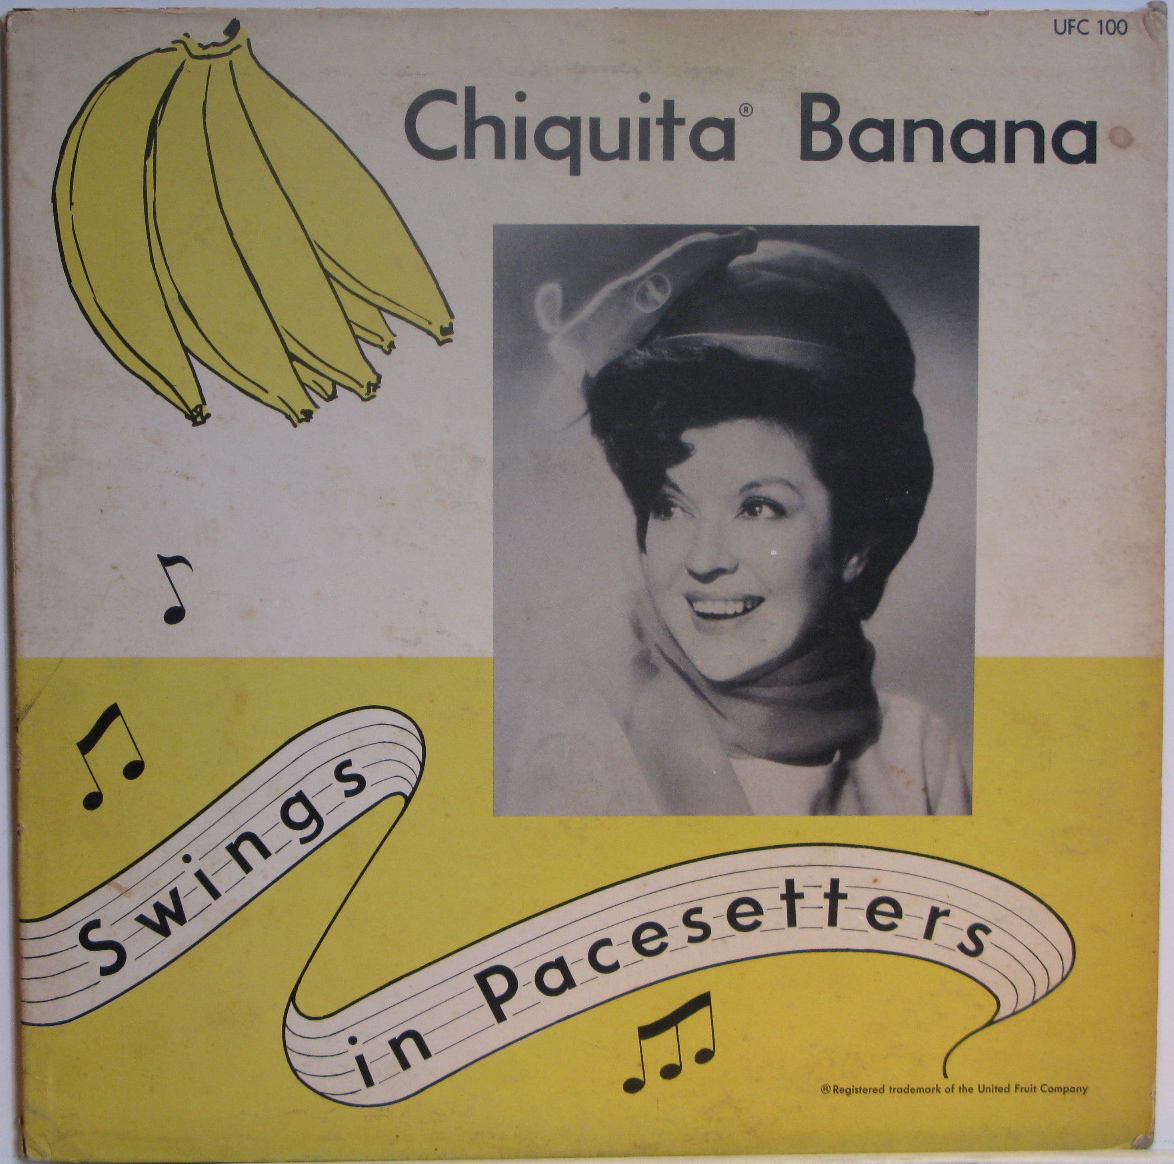 From the United Fruit Company, Chiquita Banana live at Pacesetters! 